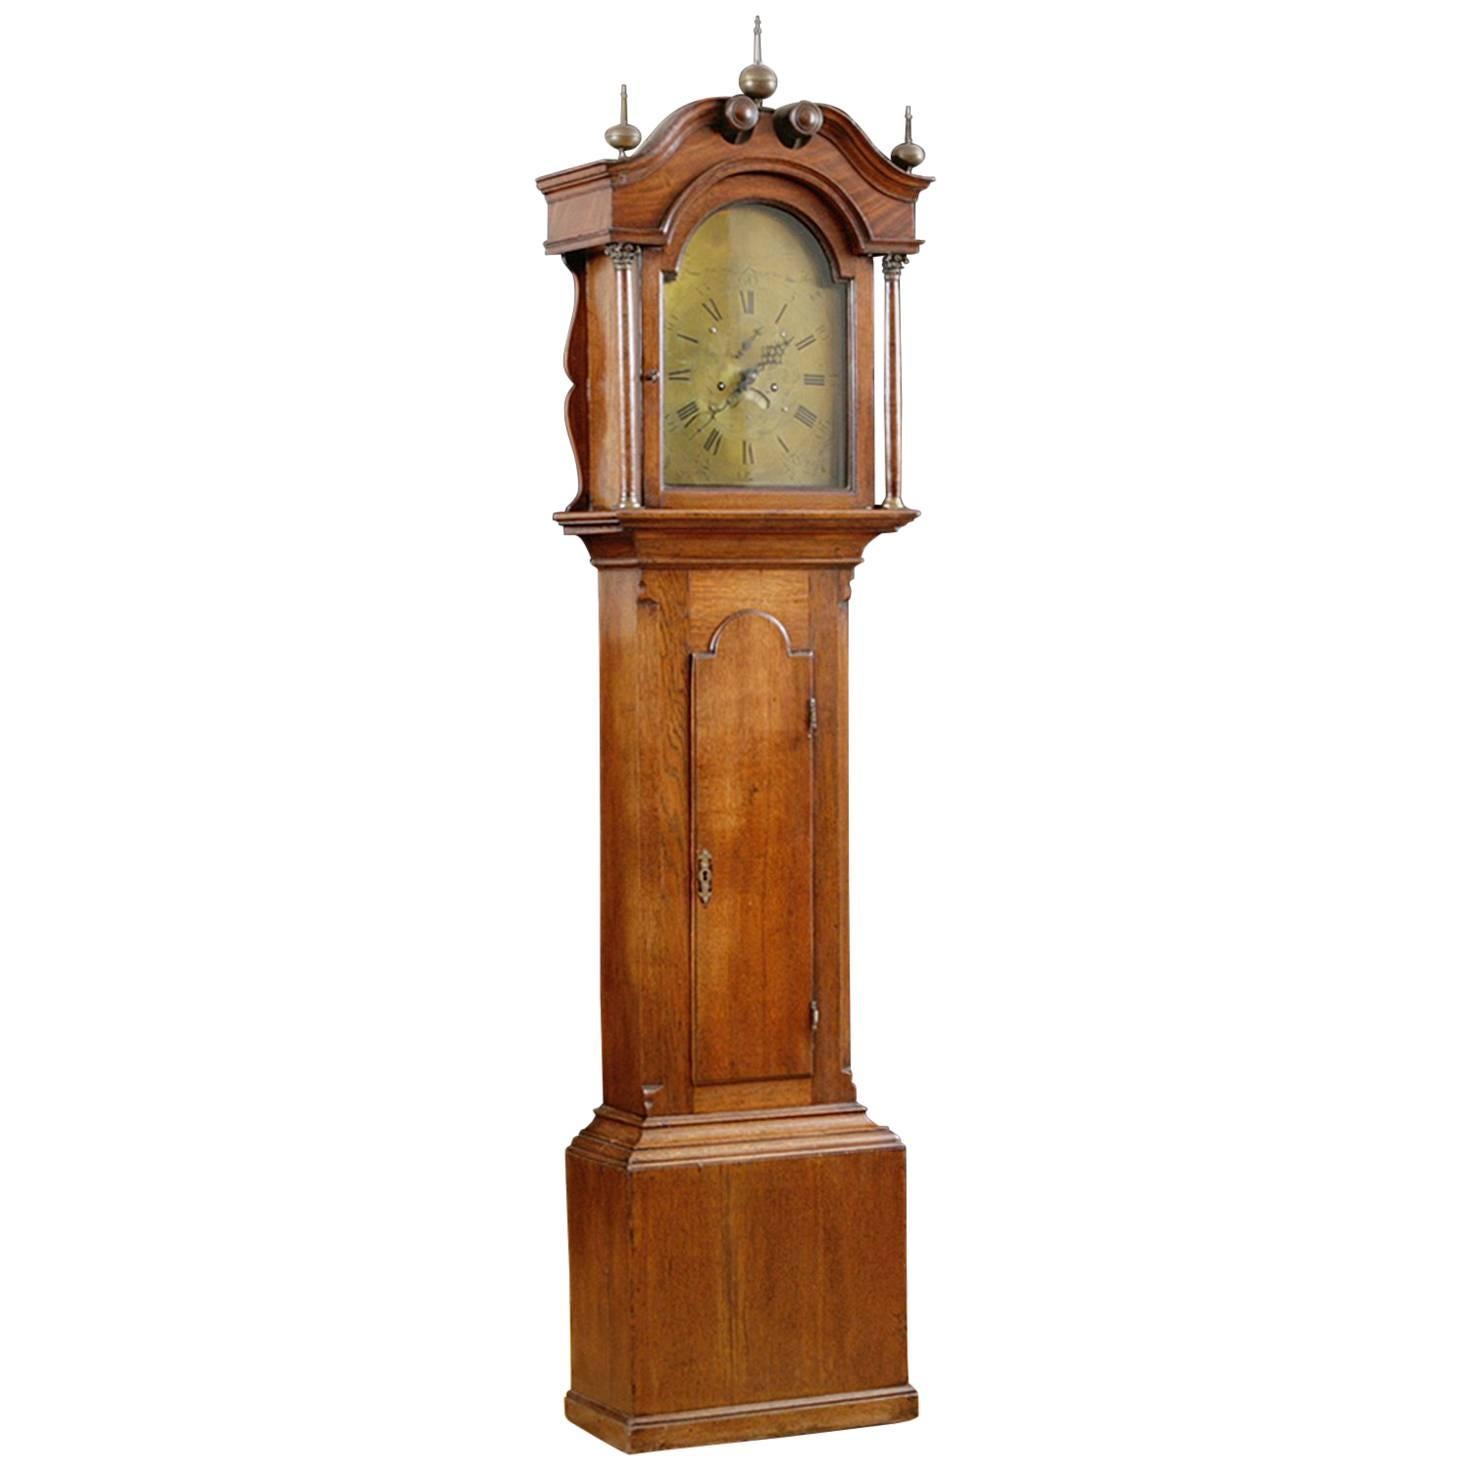 English Case Clock in Oak with 8-Day Movement and Brass Dial, circa 1830